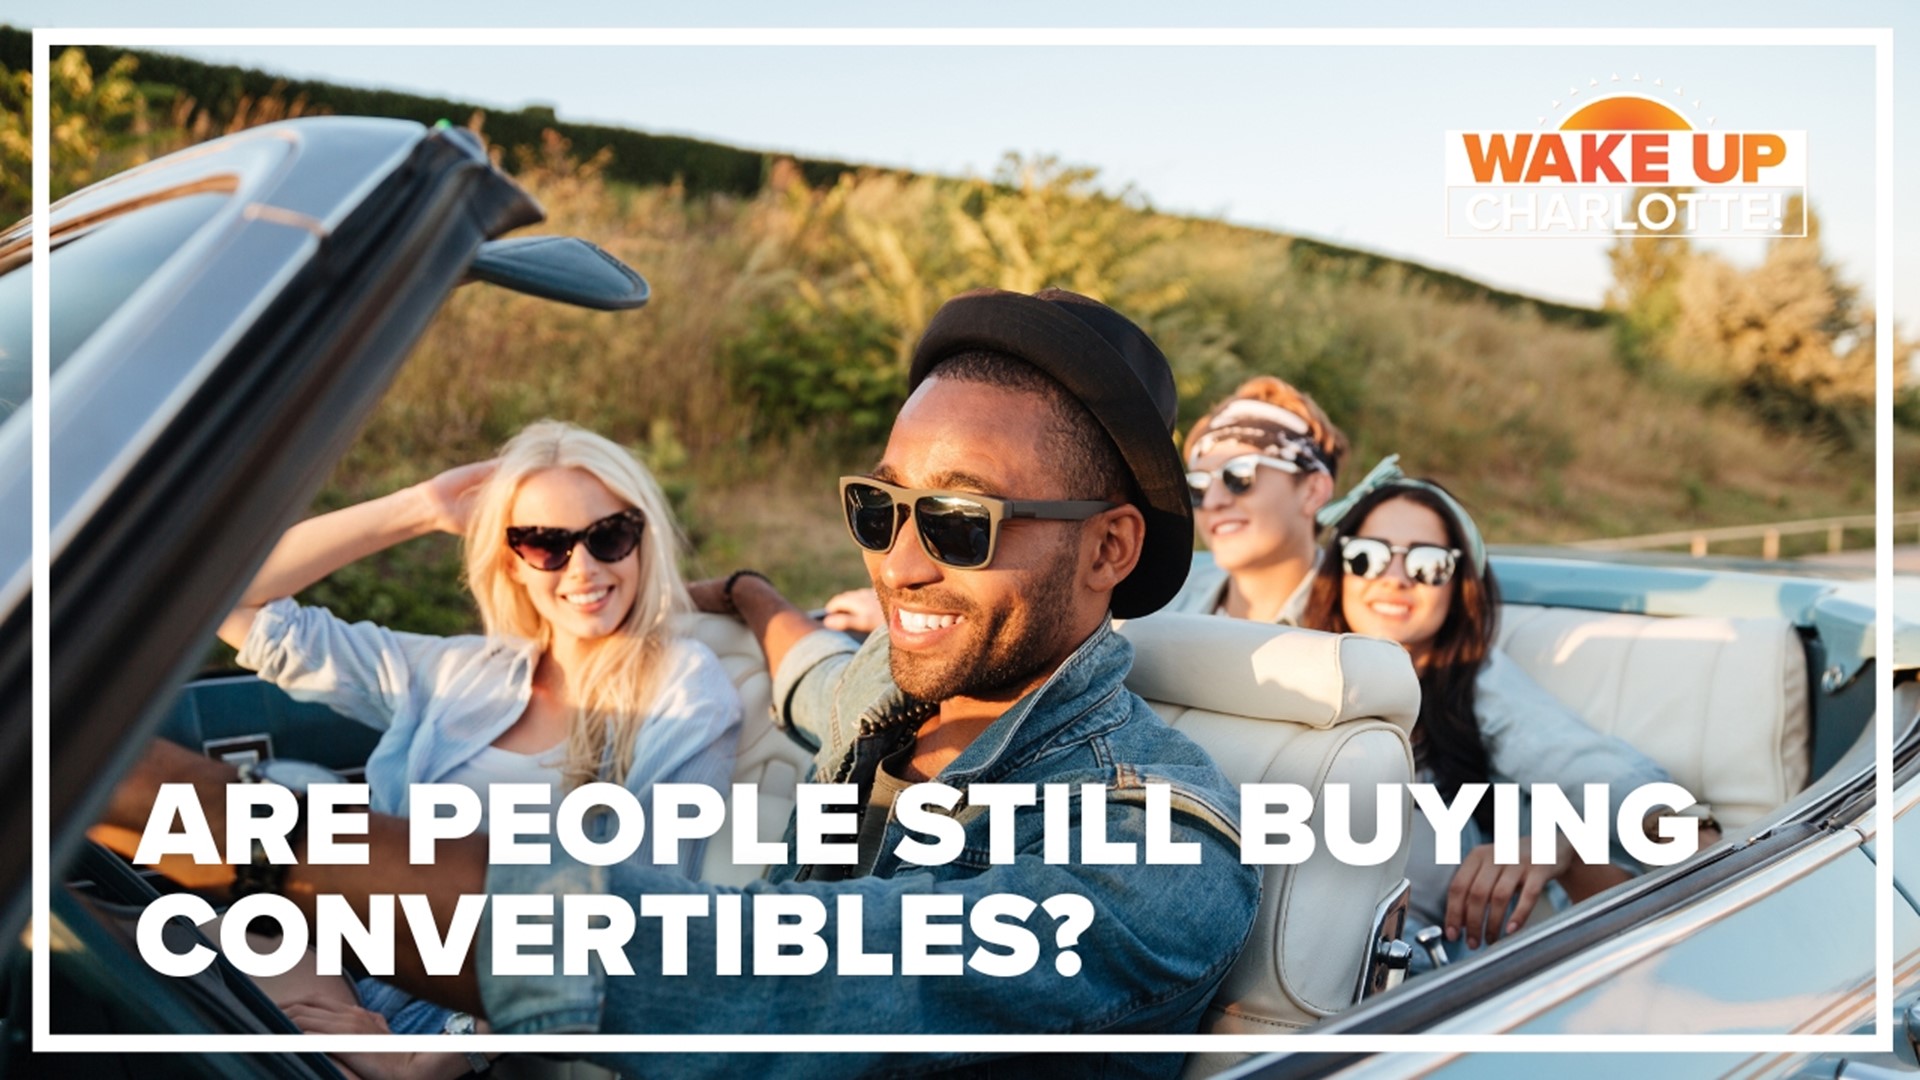 Sales on convertible vehicles have dropped by 68%.